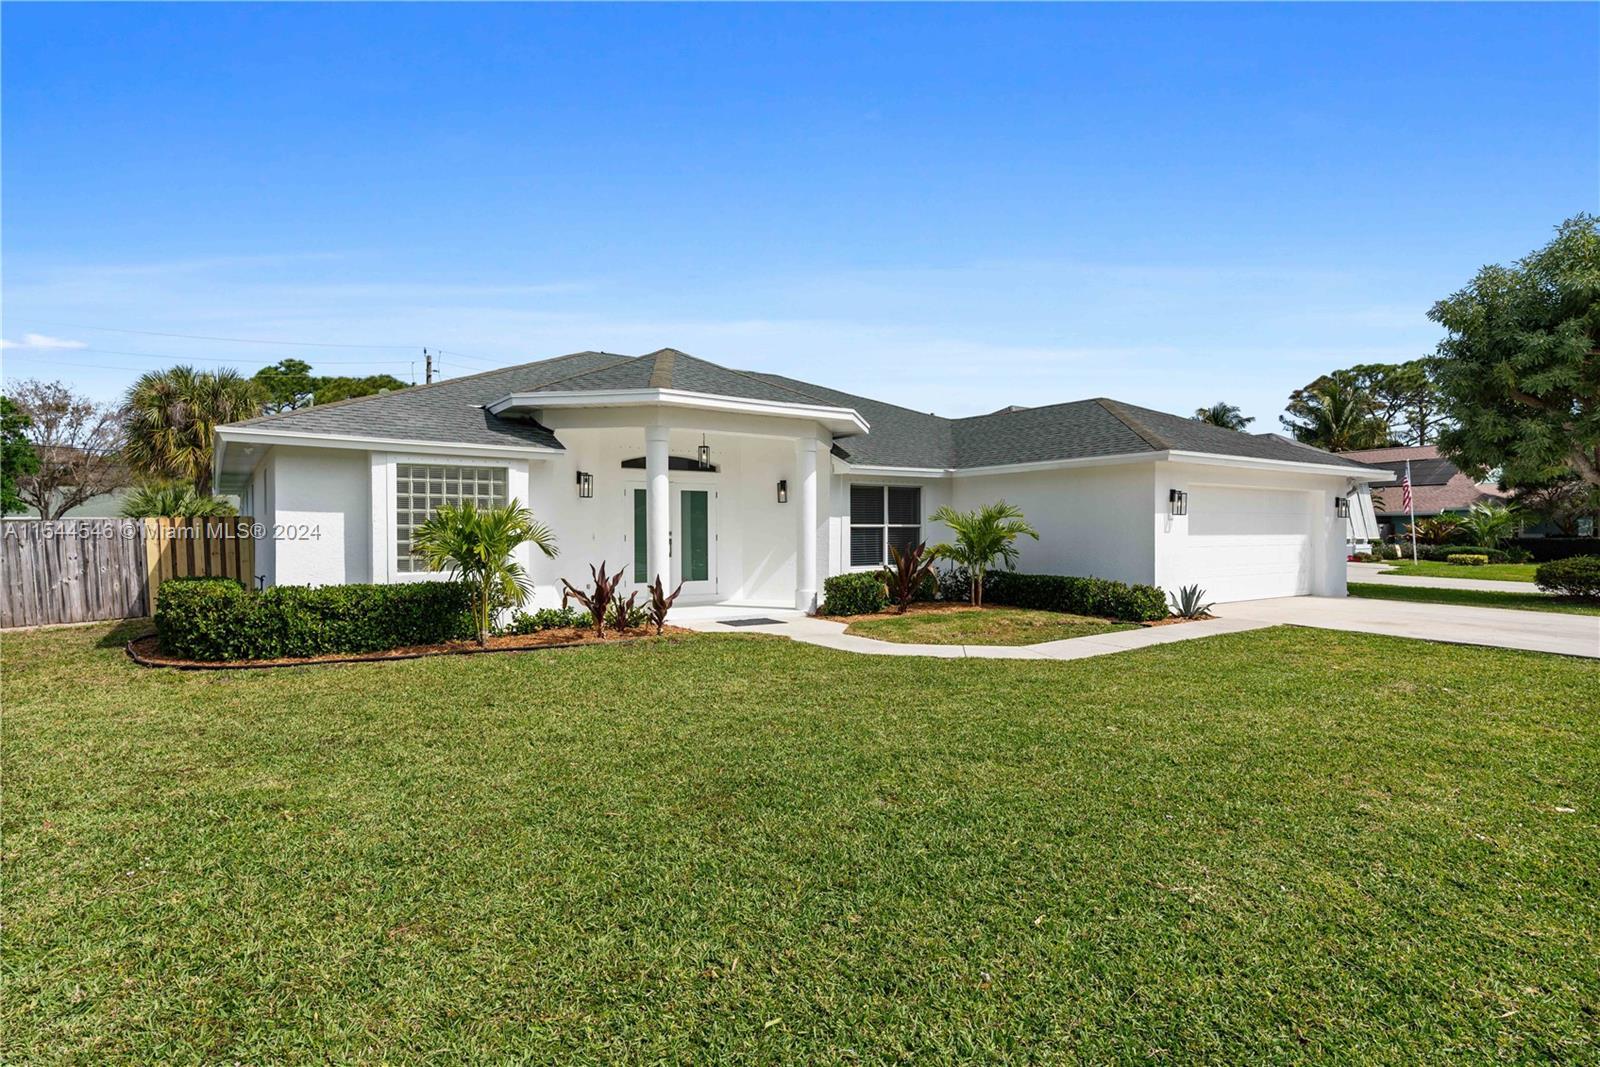 Experience the luxury of a fully renovated home in the Loxahatchee River Point area. Be the first to